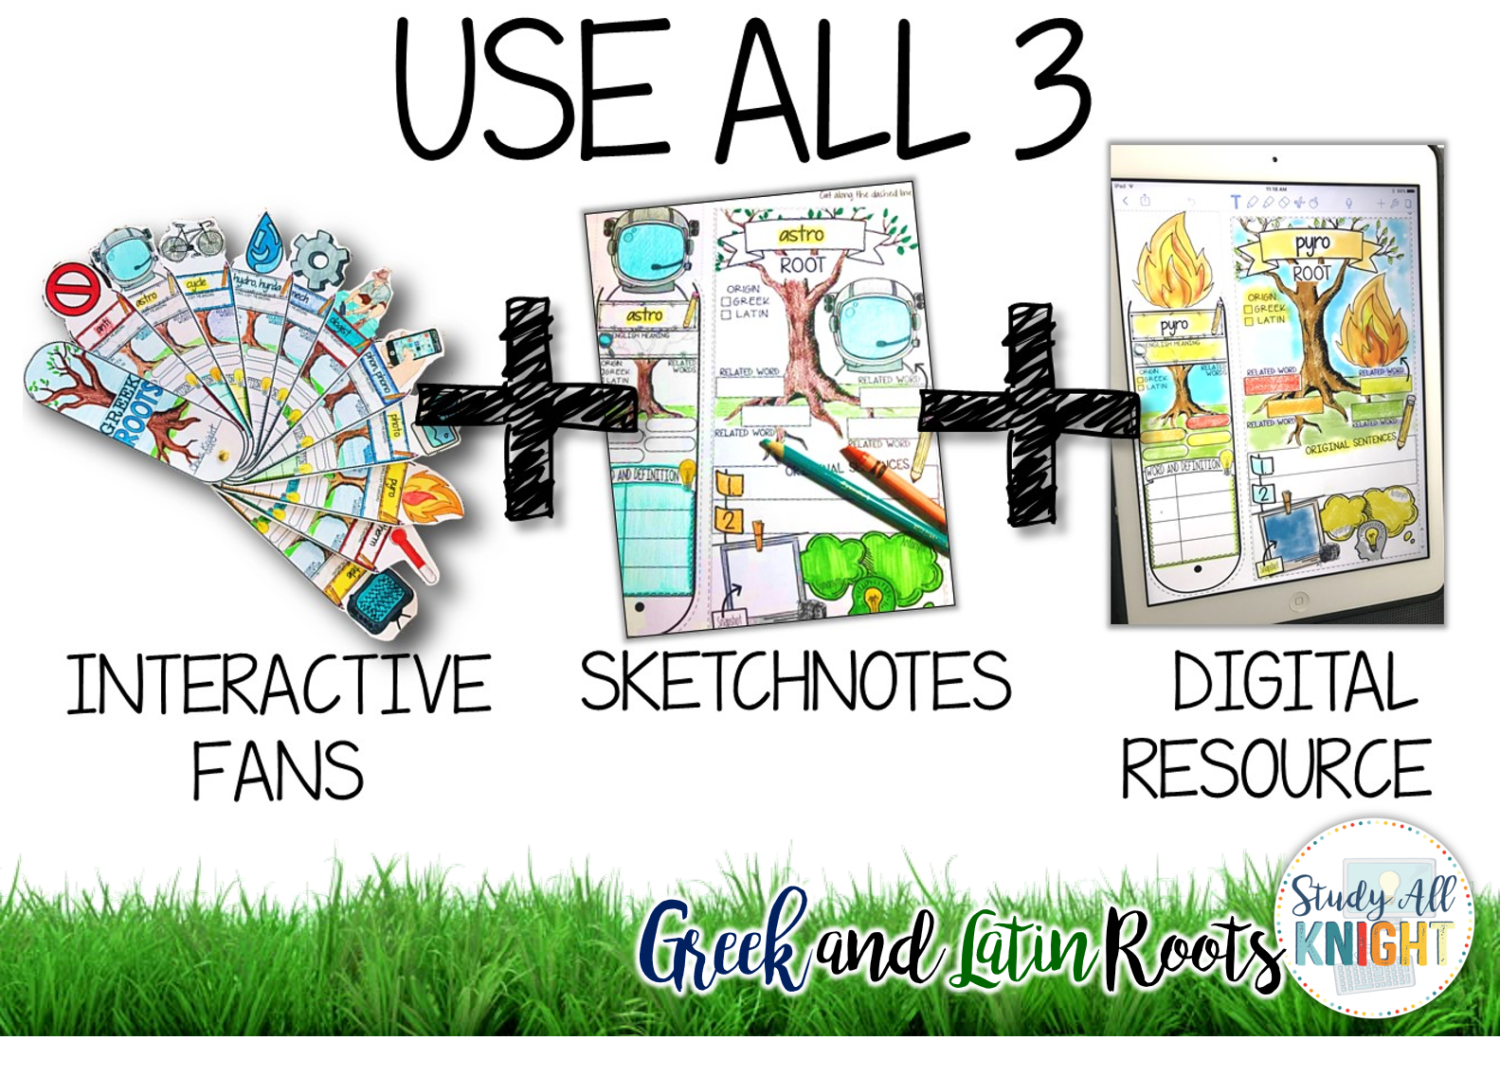 Greek and Latin Roots all school year long! Greek and Latin roots are the foundation of building vocabulary. Why not make it fun!  Interactive fan, sketchnotes, and the digital resource. greekandlatinroots #vocabularylessons #sketchnotes 